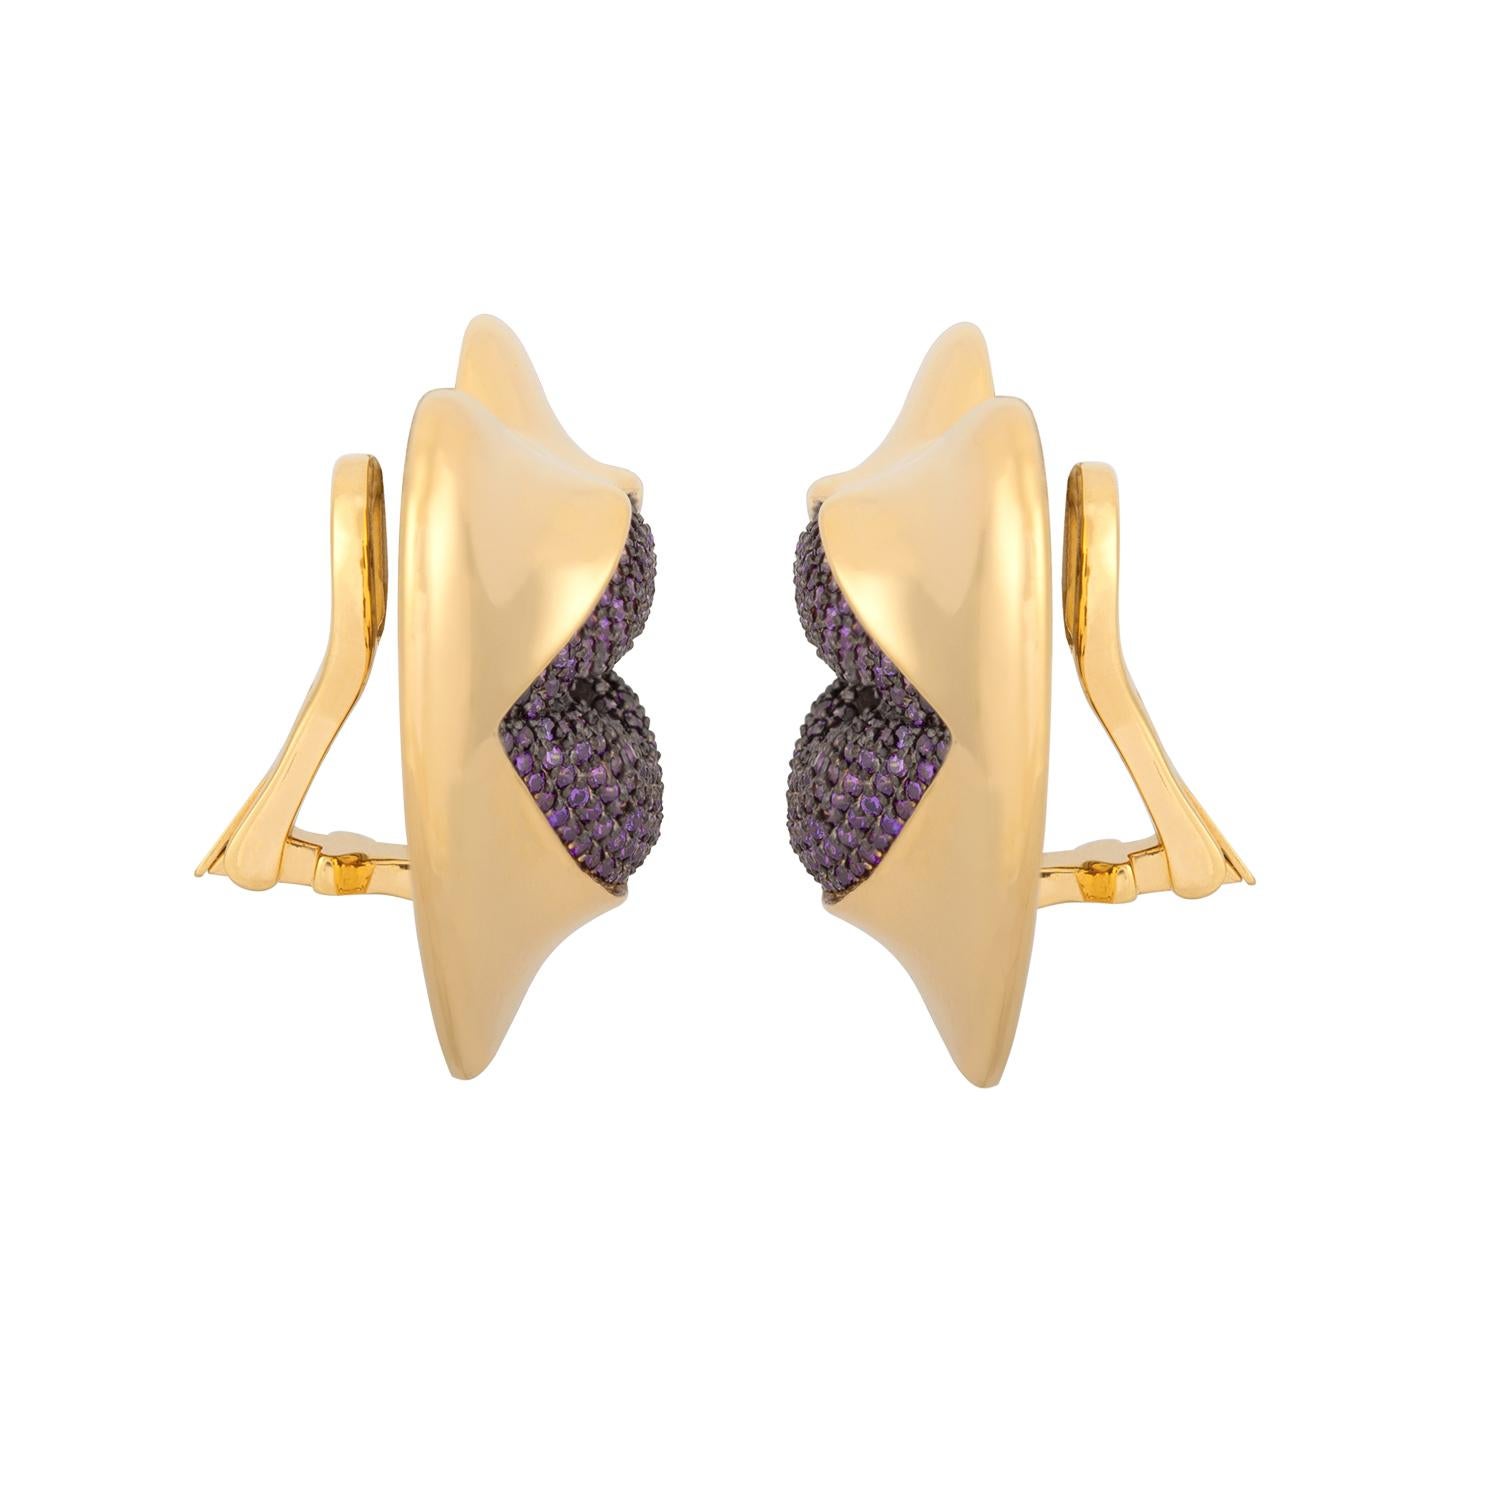 Love Lips Statement clip on earrings with amethyst kisses. Show your color of love with these purple candy kiss clip on earrings. Gems of these purple colored love kiss earrings are all hand set, sparkle like amethyst. Shine with your love.

PRODUCT